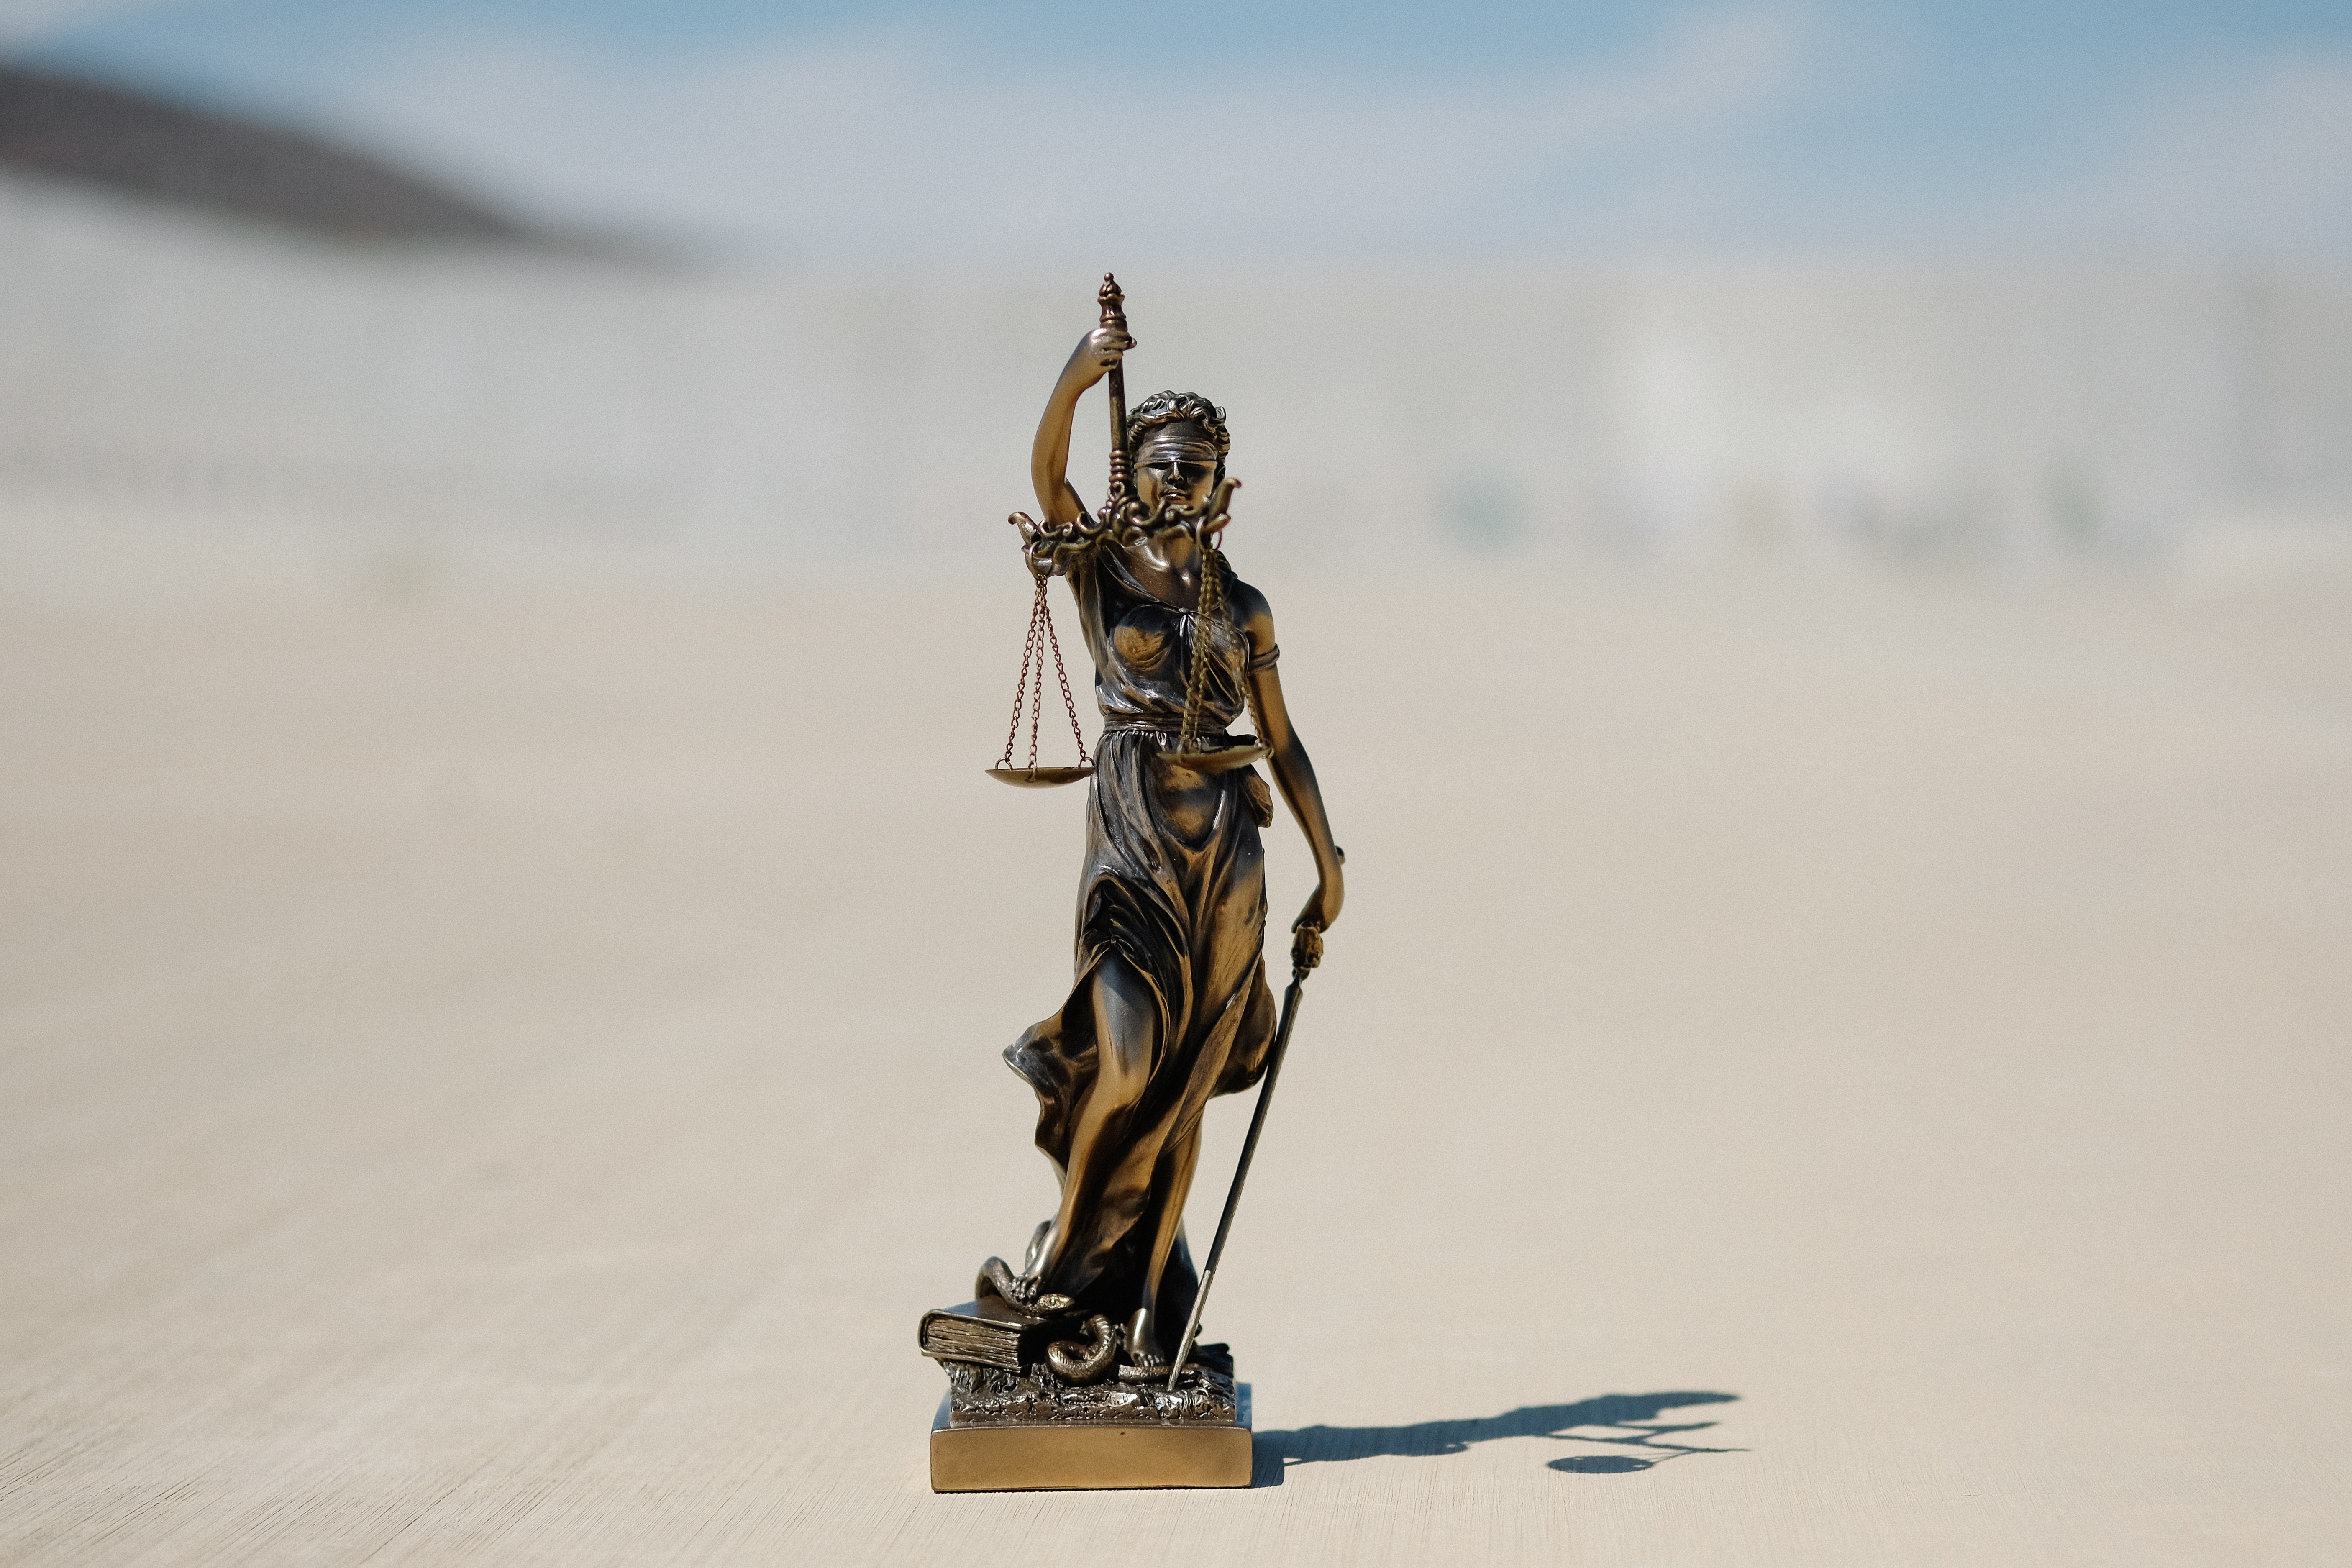 stock photo of a statue of Lady Justice,blindfolded and holding scales.